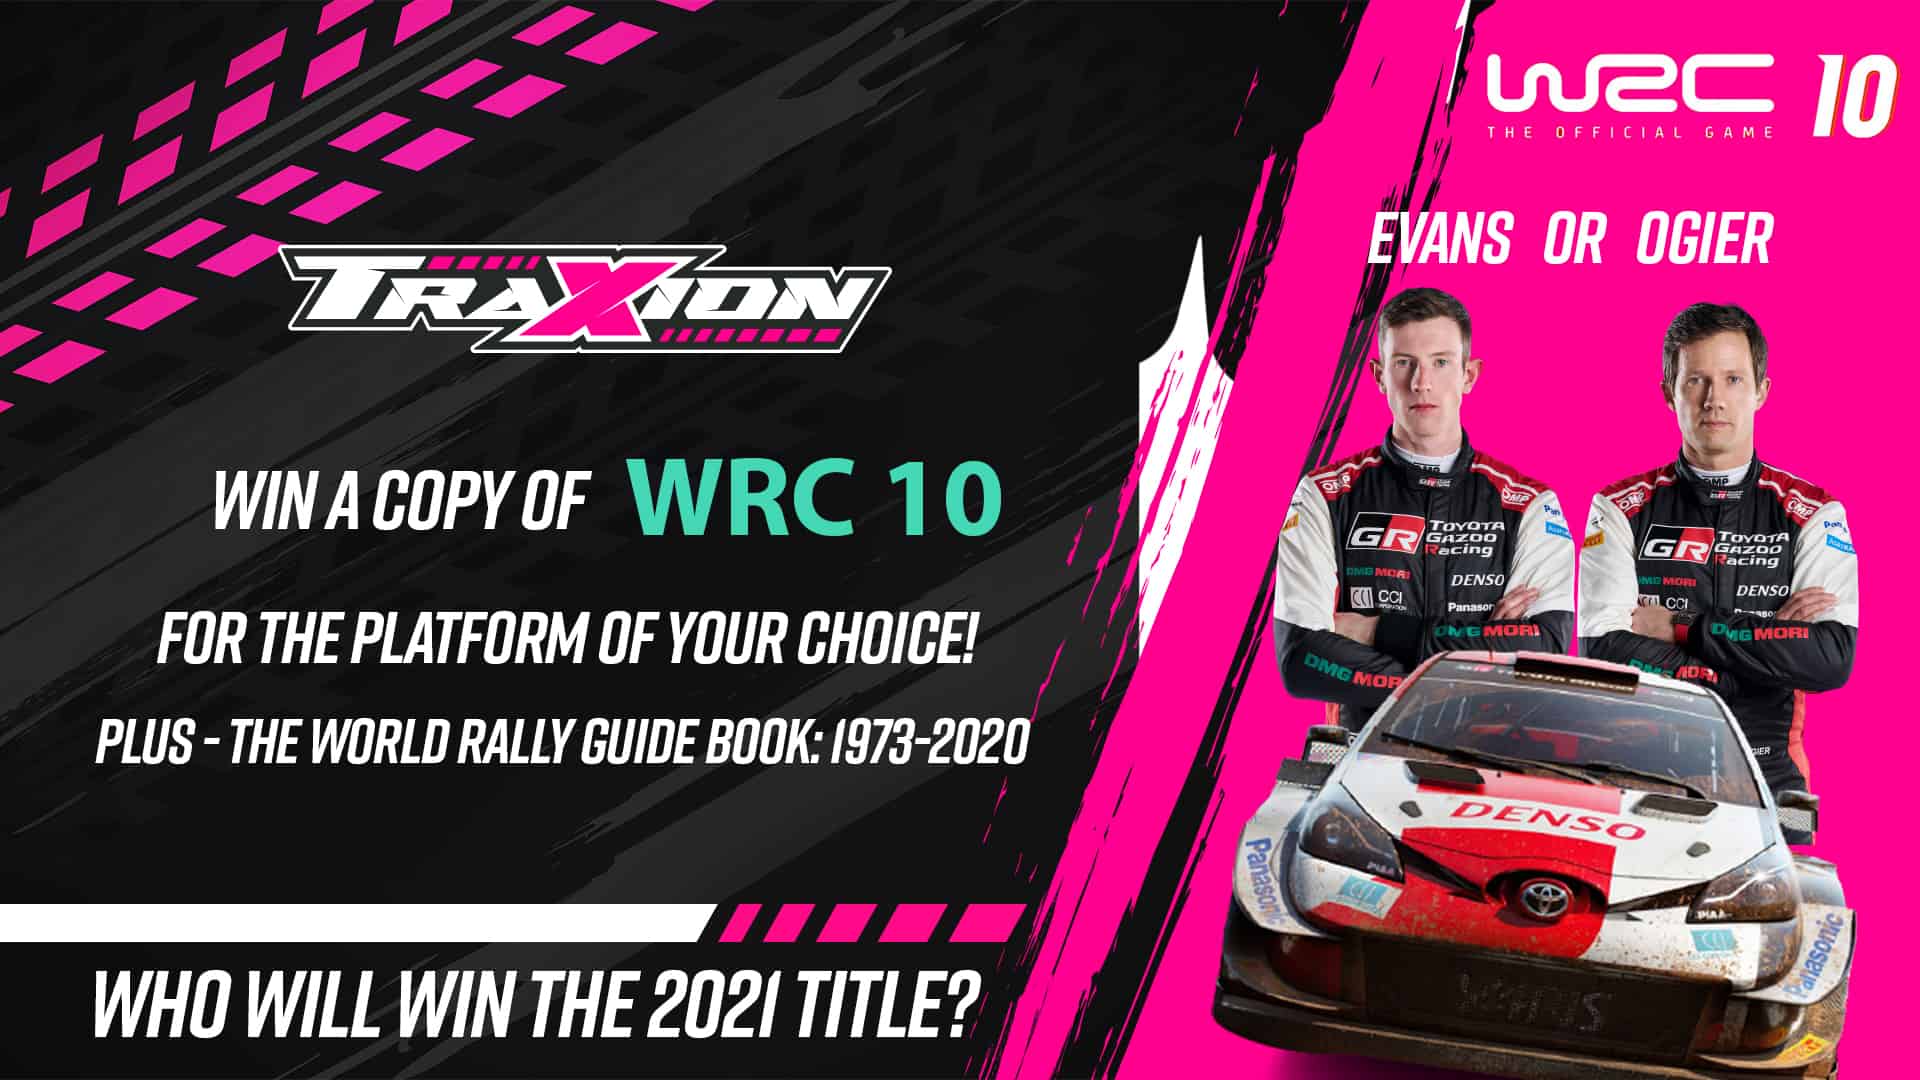 You could win WRC 10 and a World Rally Guide Book